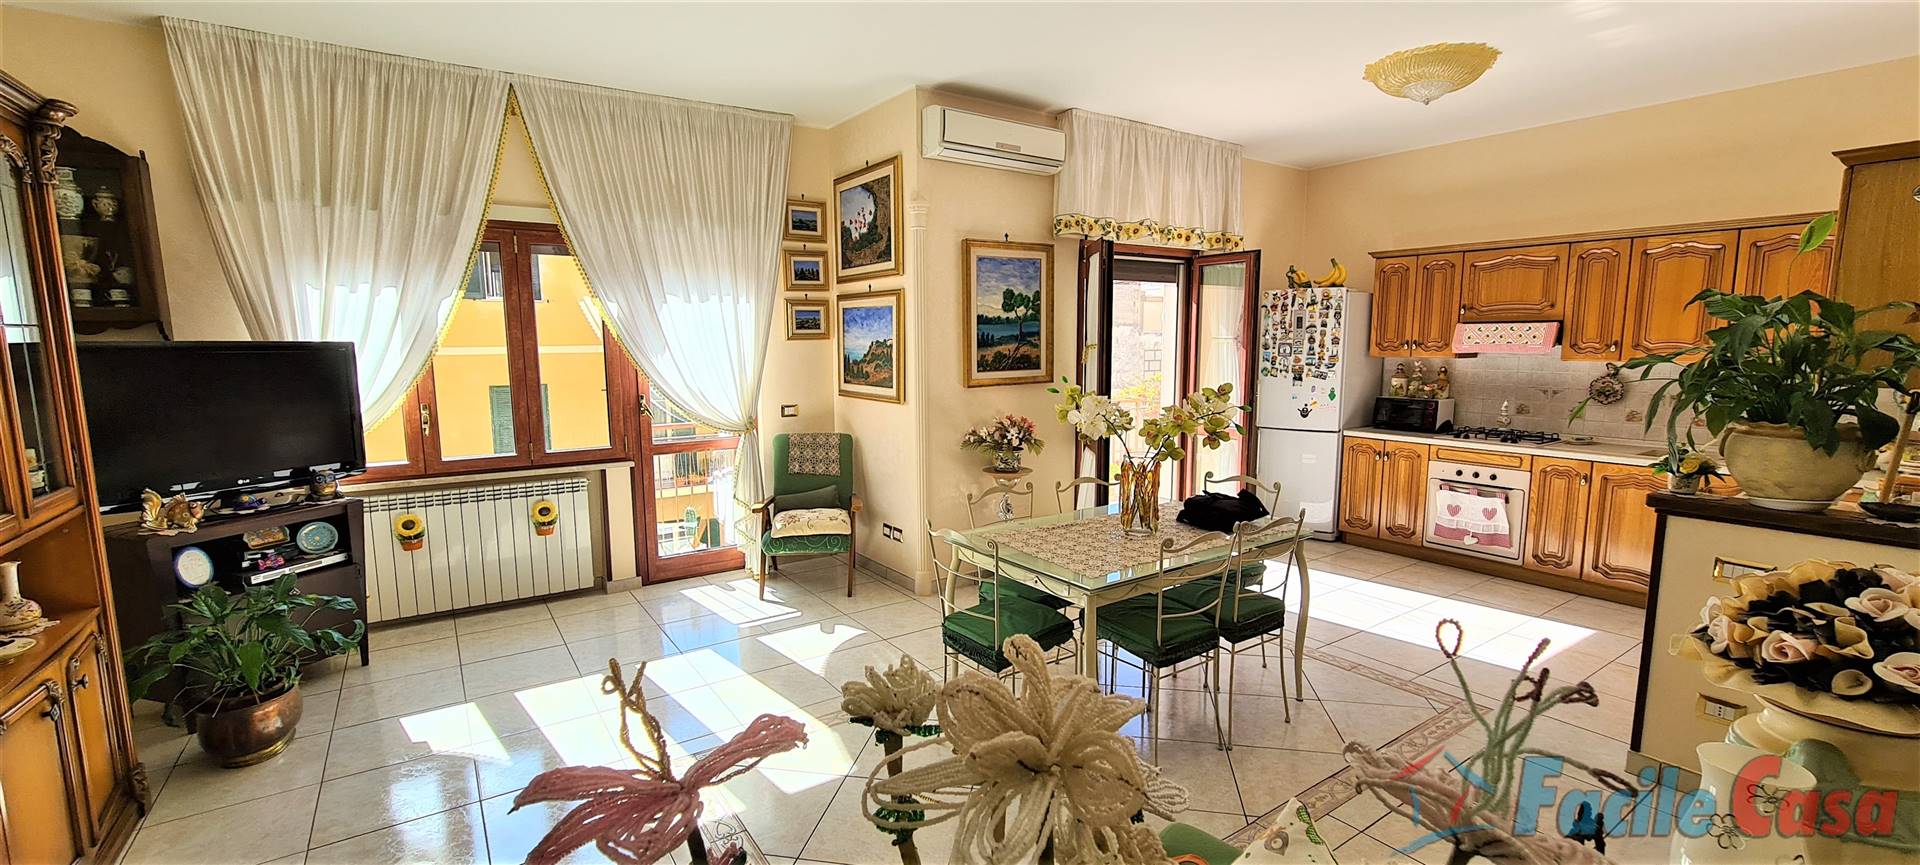 FORMIA, Apartment for sale of 80 Sq. mt., Excellent Condition, Heating Individual heating system, Energetic class: G, placed at 1° on 3, composed by: 